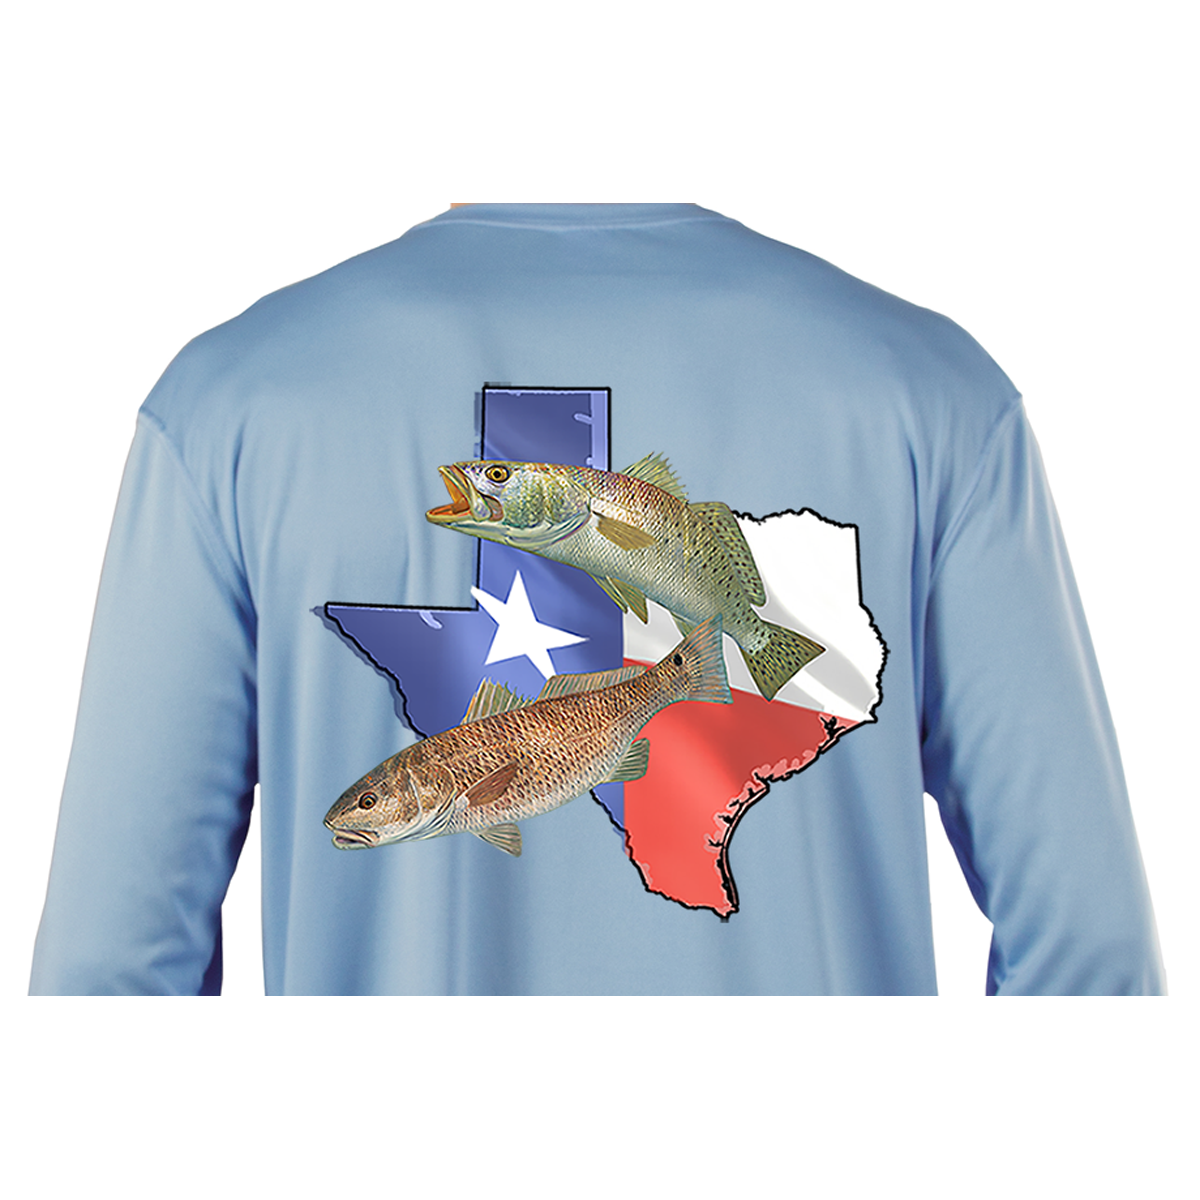 Texas Redfish & Trout Fishing Shirt with Texas State Flag Sleeve Ice Blue / 4XL